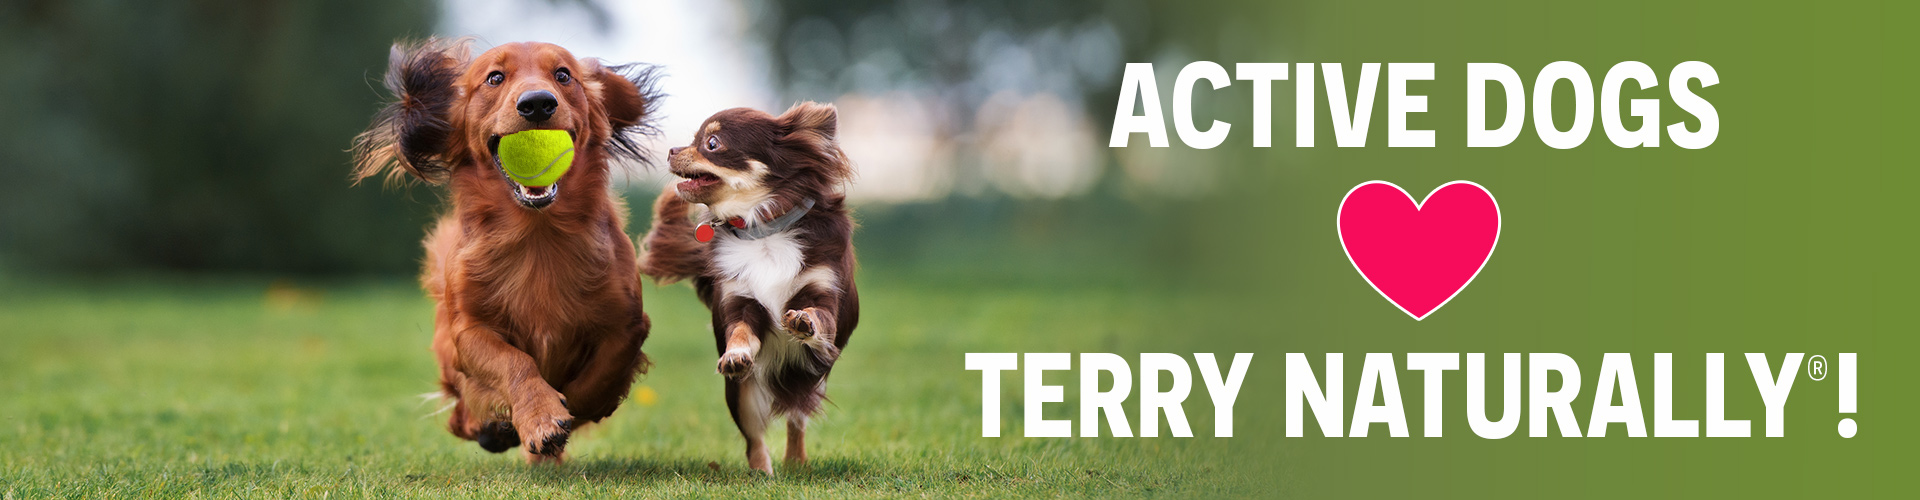 ACTIVE DOGS • TERRY NATURALLY®!